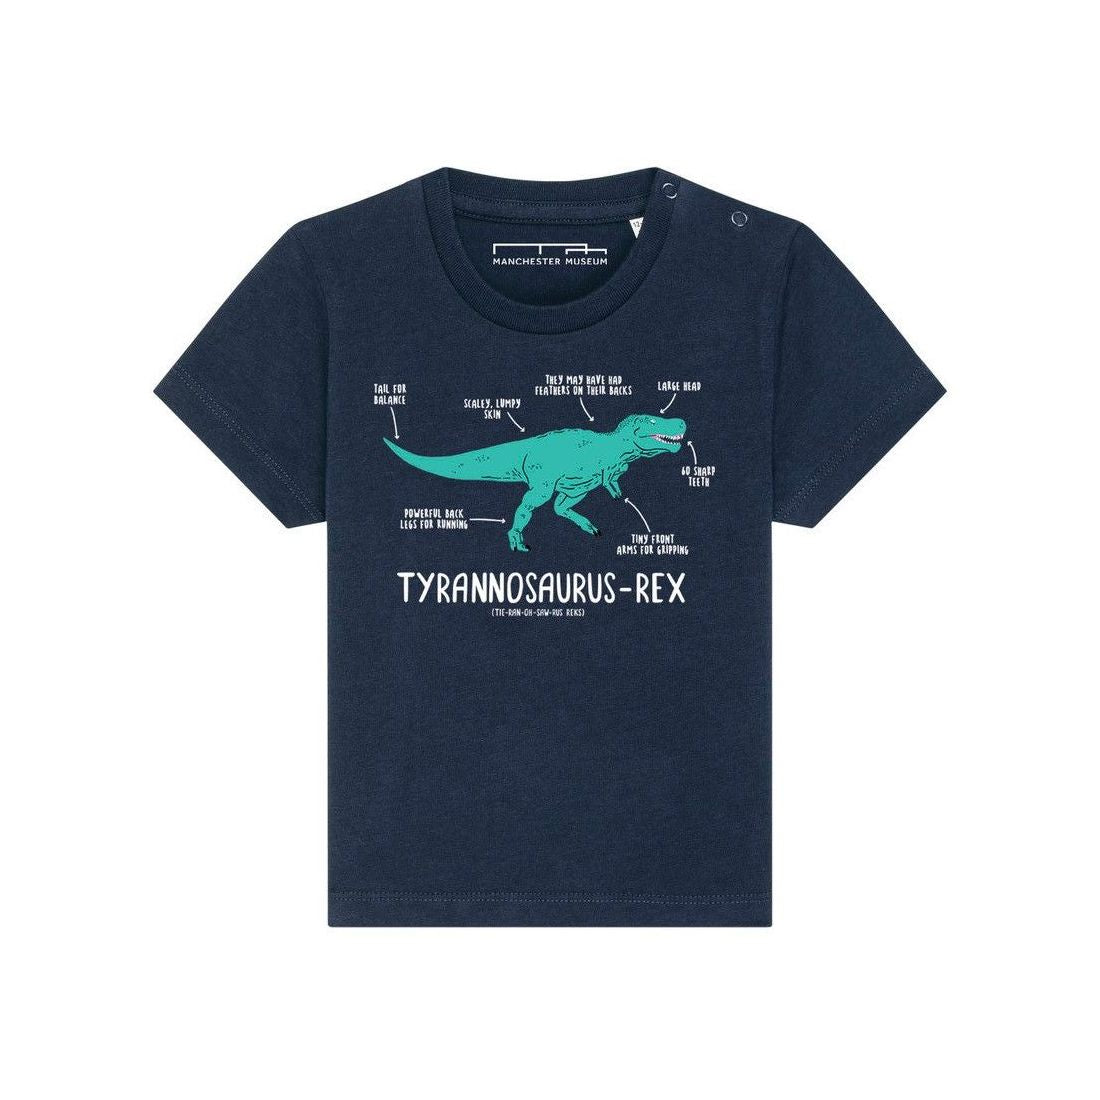 Load image into Gallery viewer, Navy shirt with a turquoise illustrated t-rex printed on the chest. Underneath the dinosaur the name and pronunciation are written in white.
